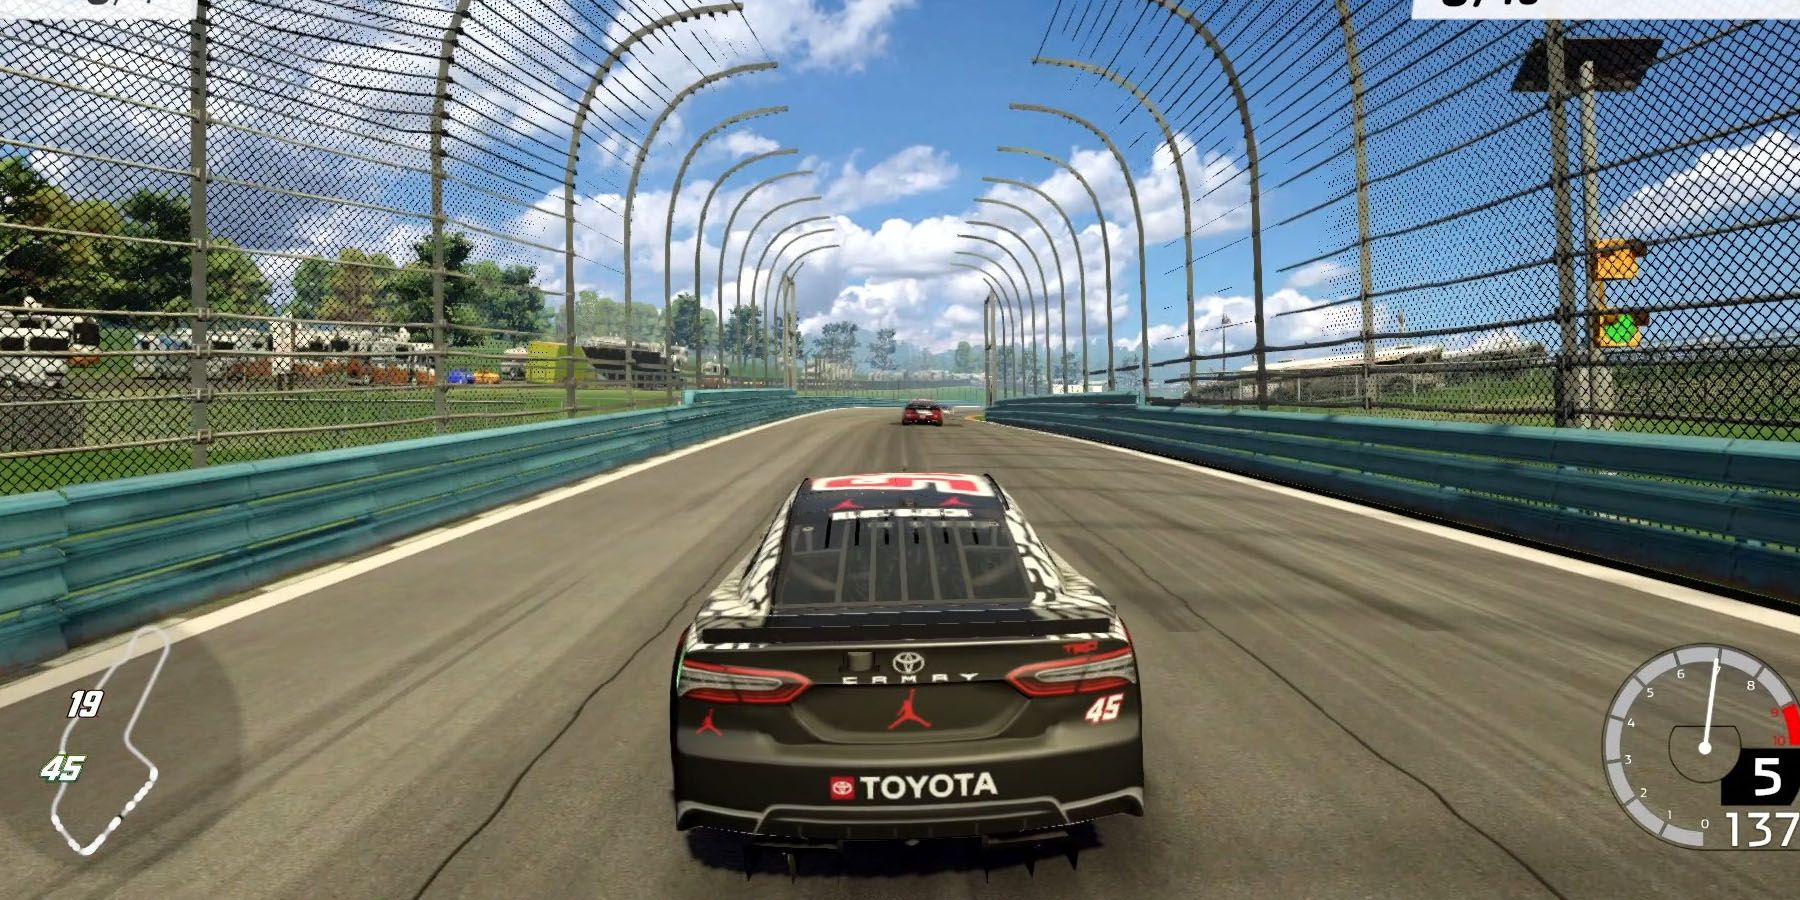 Racing with a vehicle in Nascar Rivals